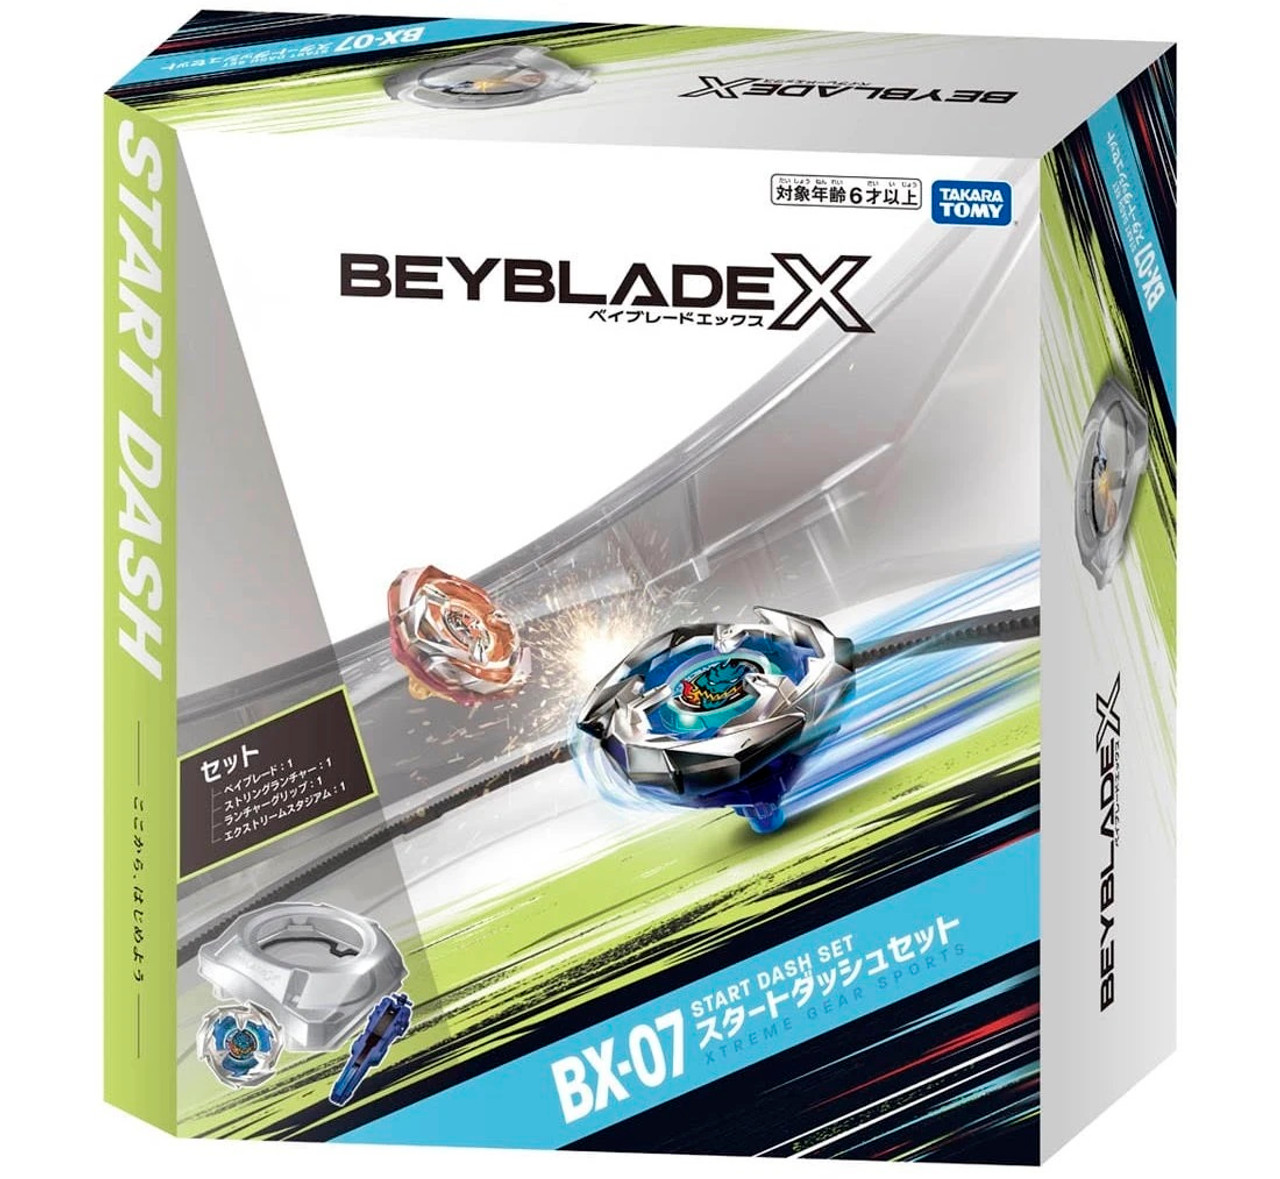 [For DHL, UPS, etc ONLY] Takara Tomy Beyblade X BX-07 Start Dash Set  (All in One Entry Set)